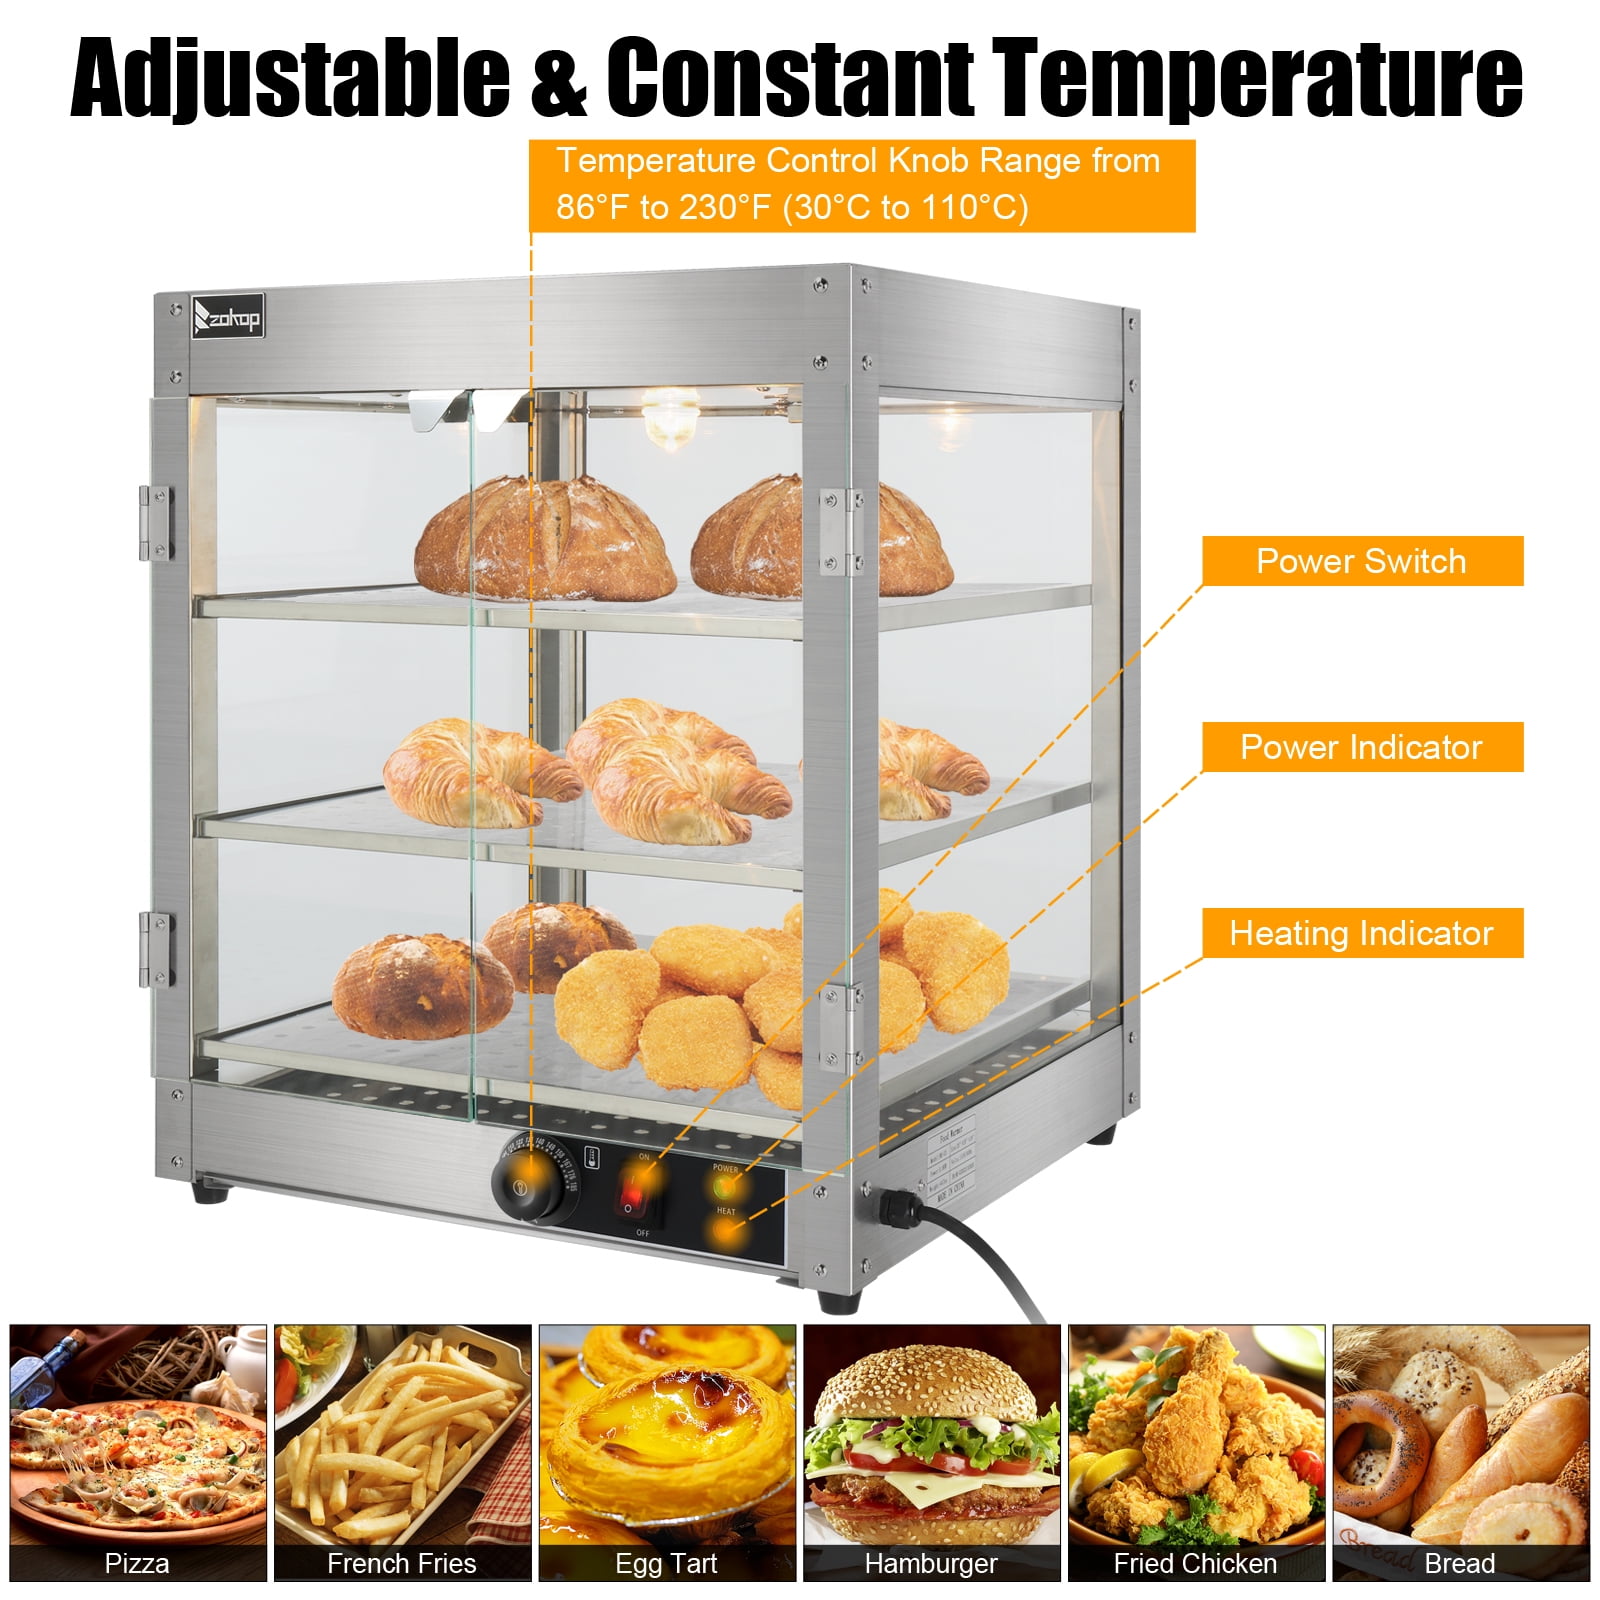 Yescom 3-Tier 110V Commercial Countertop Food Pizza Warmer Pastry Display Case